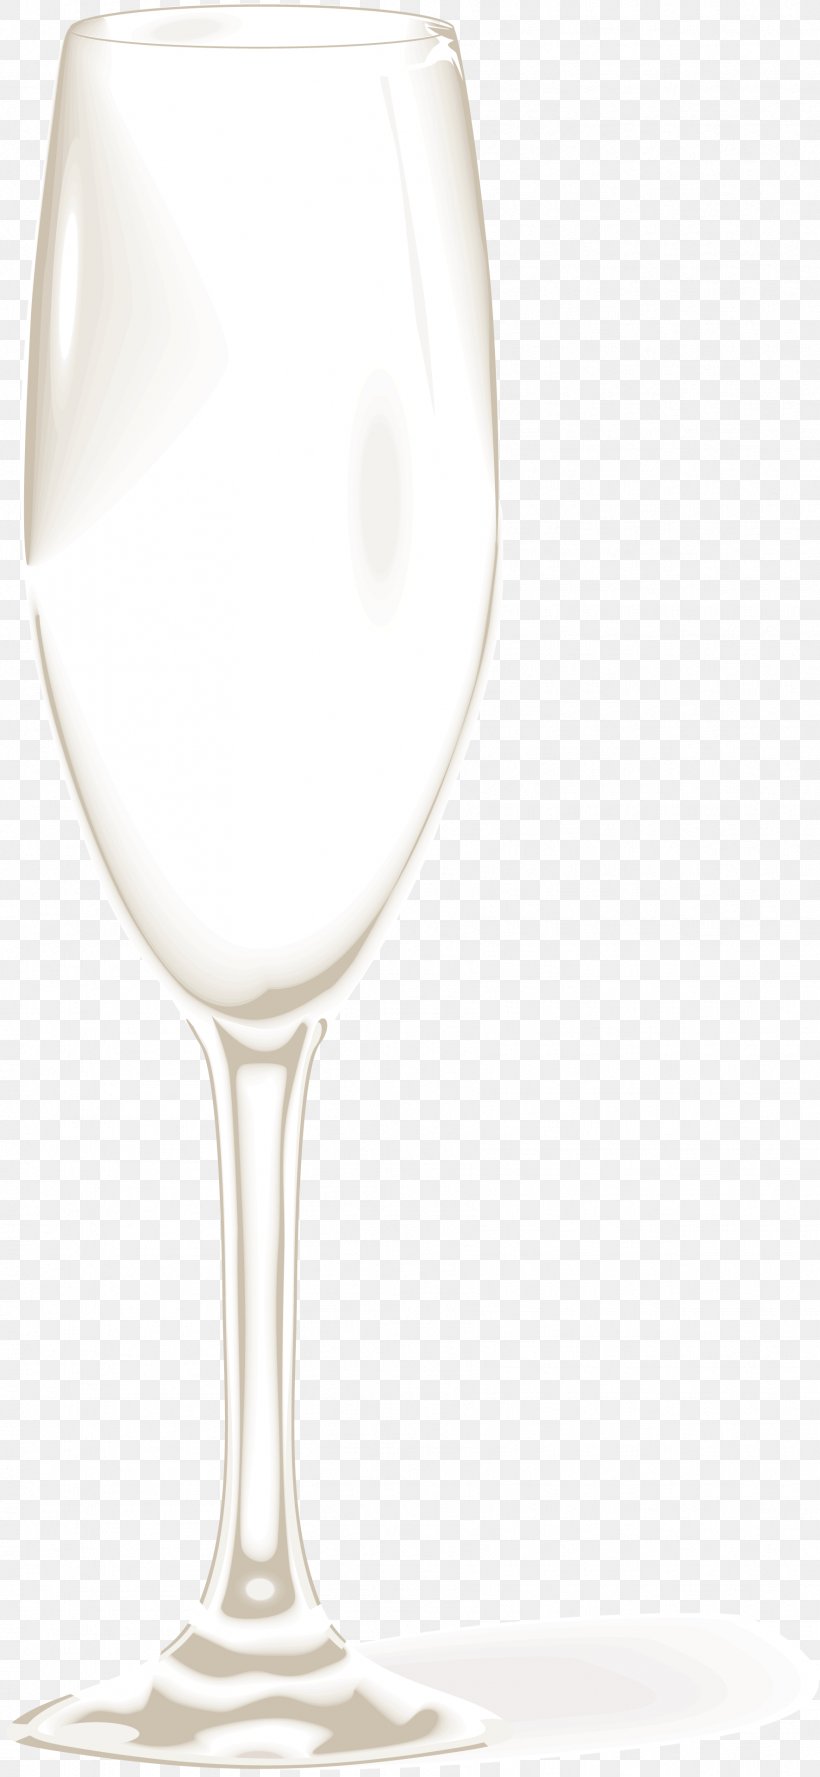 Champagne Glass Drink White Wine Wine Glass, PNG, 1771x3840px, Champagne, Alcoholic Drink, Beer Glass, Bottle, Champagne Glass Download Free